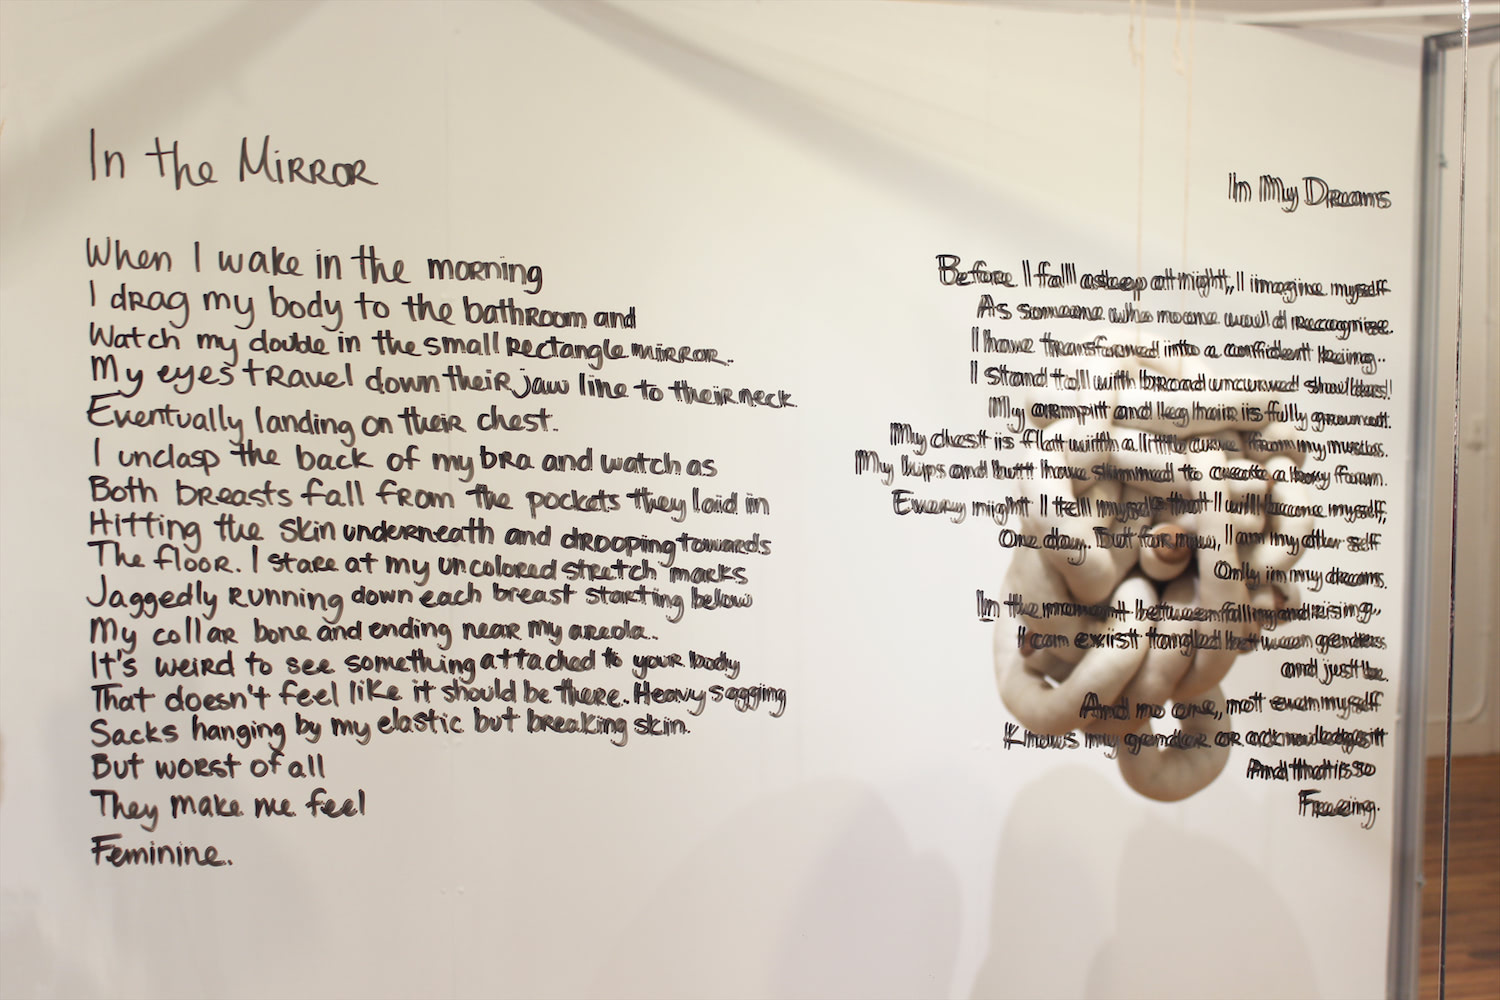 This image shows the written poems on the mirror, along with the reflection of the knotted sculpture.